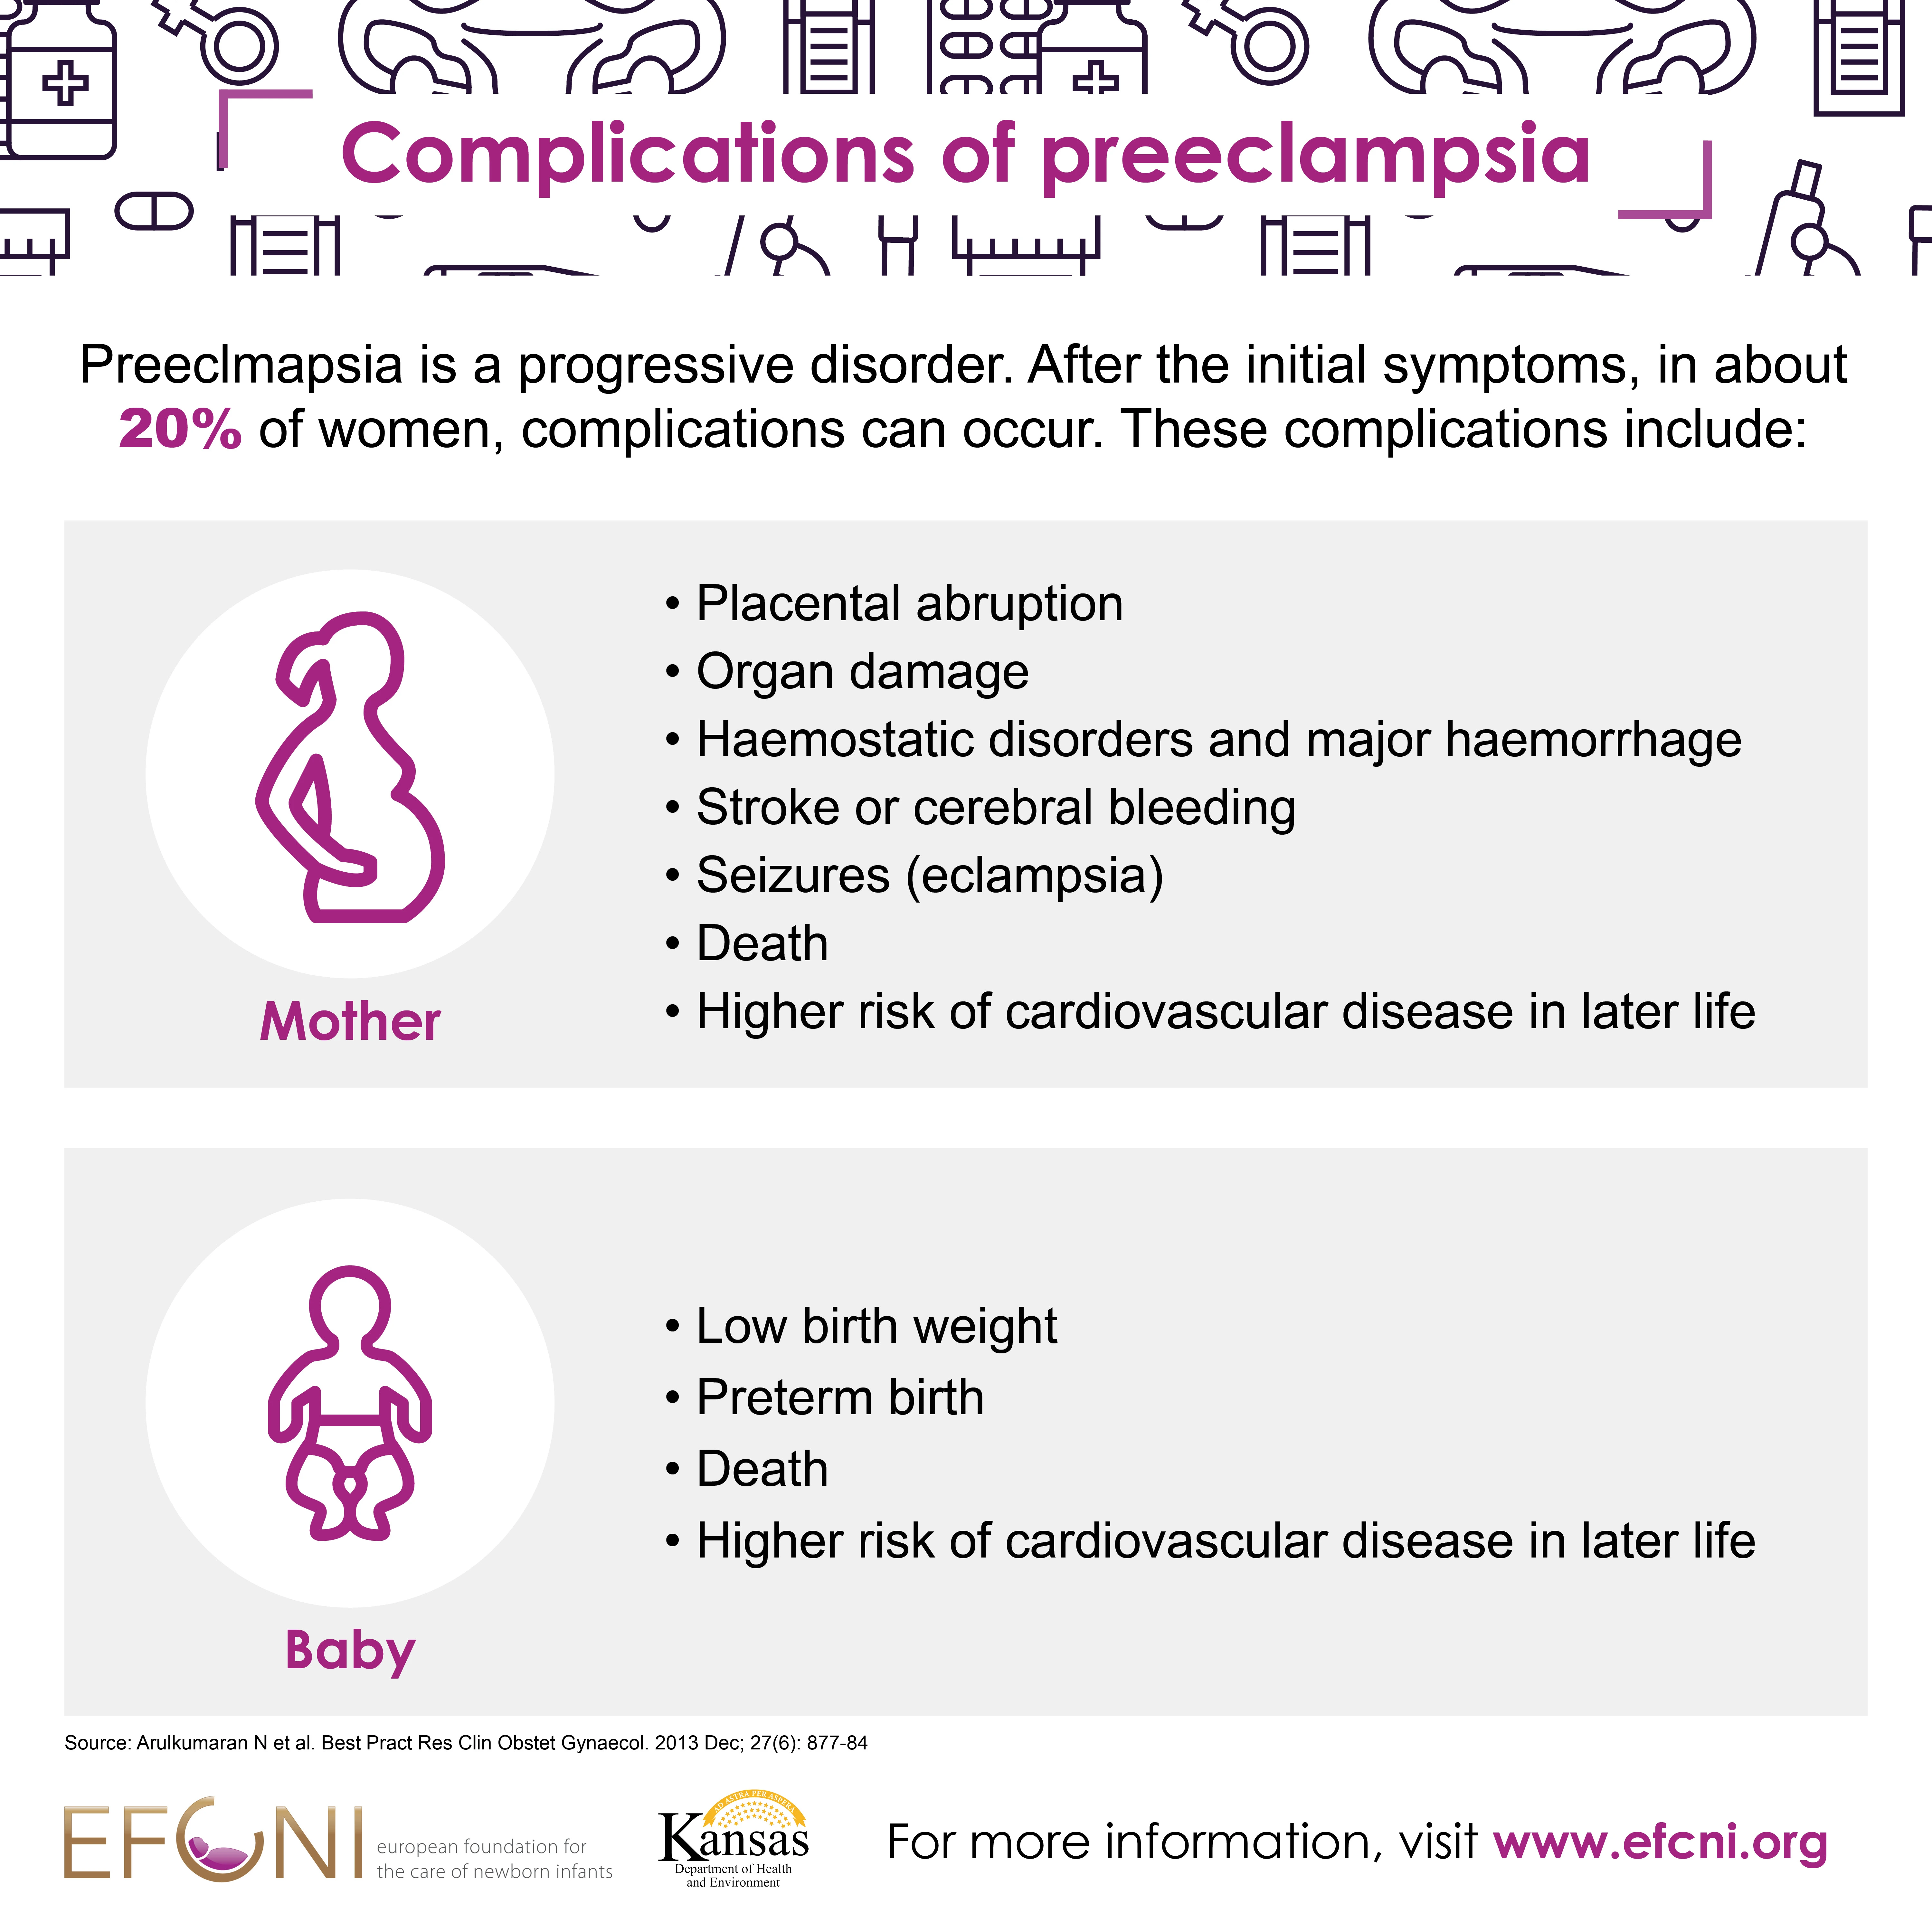 Preeclampsia Social Media Graphic - Did you know? - complications